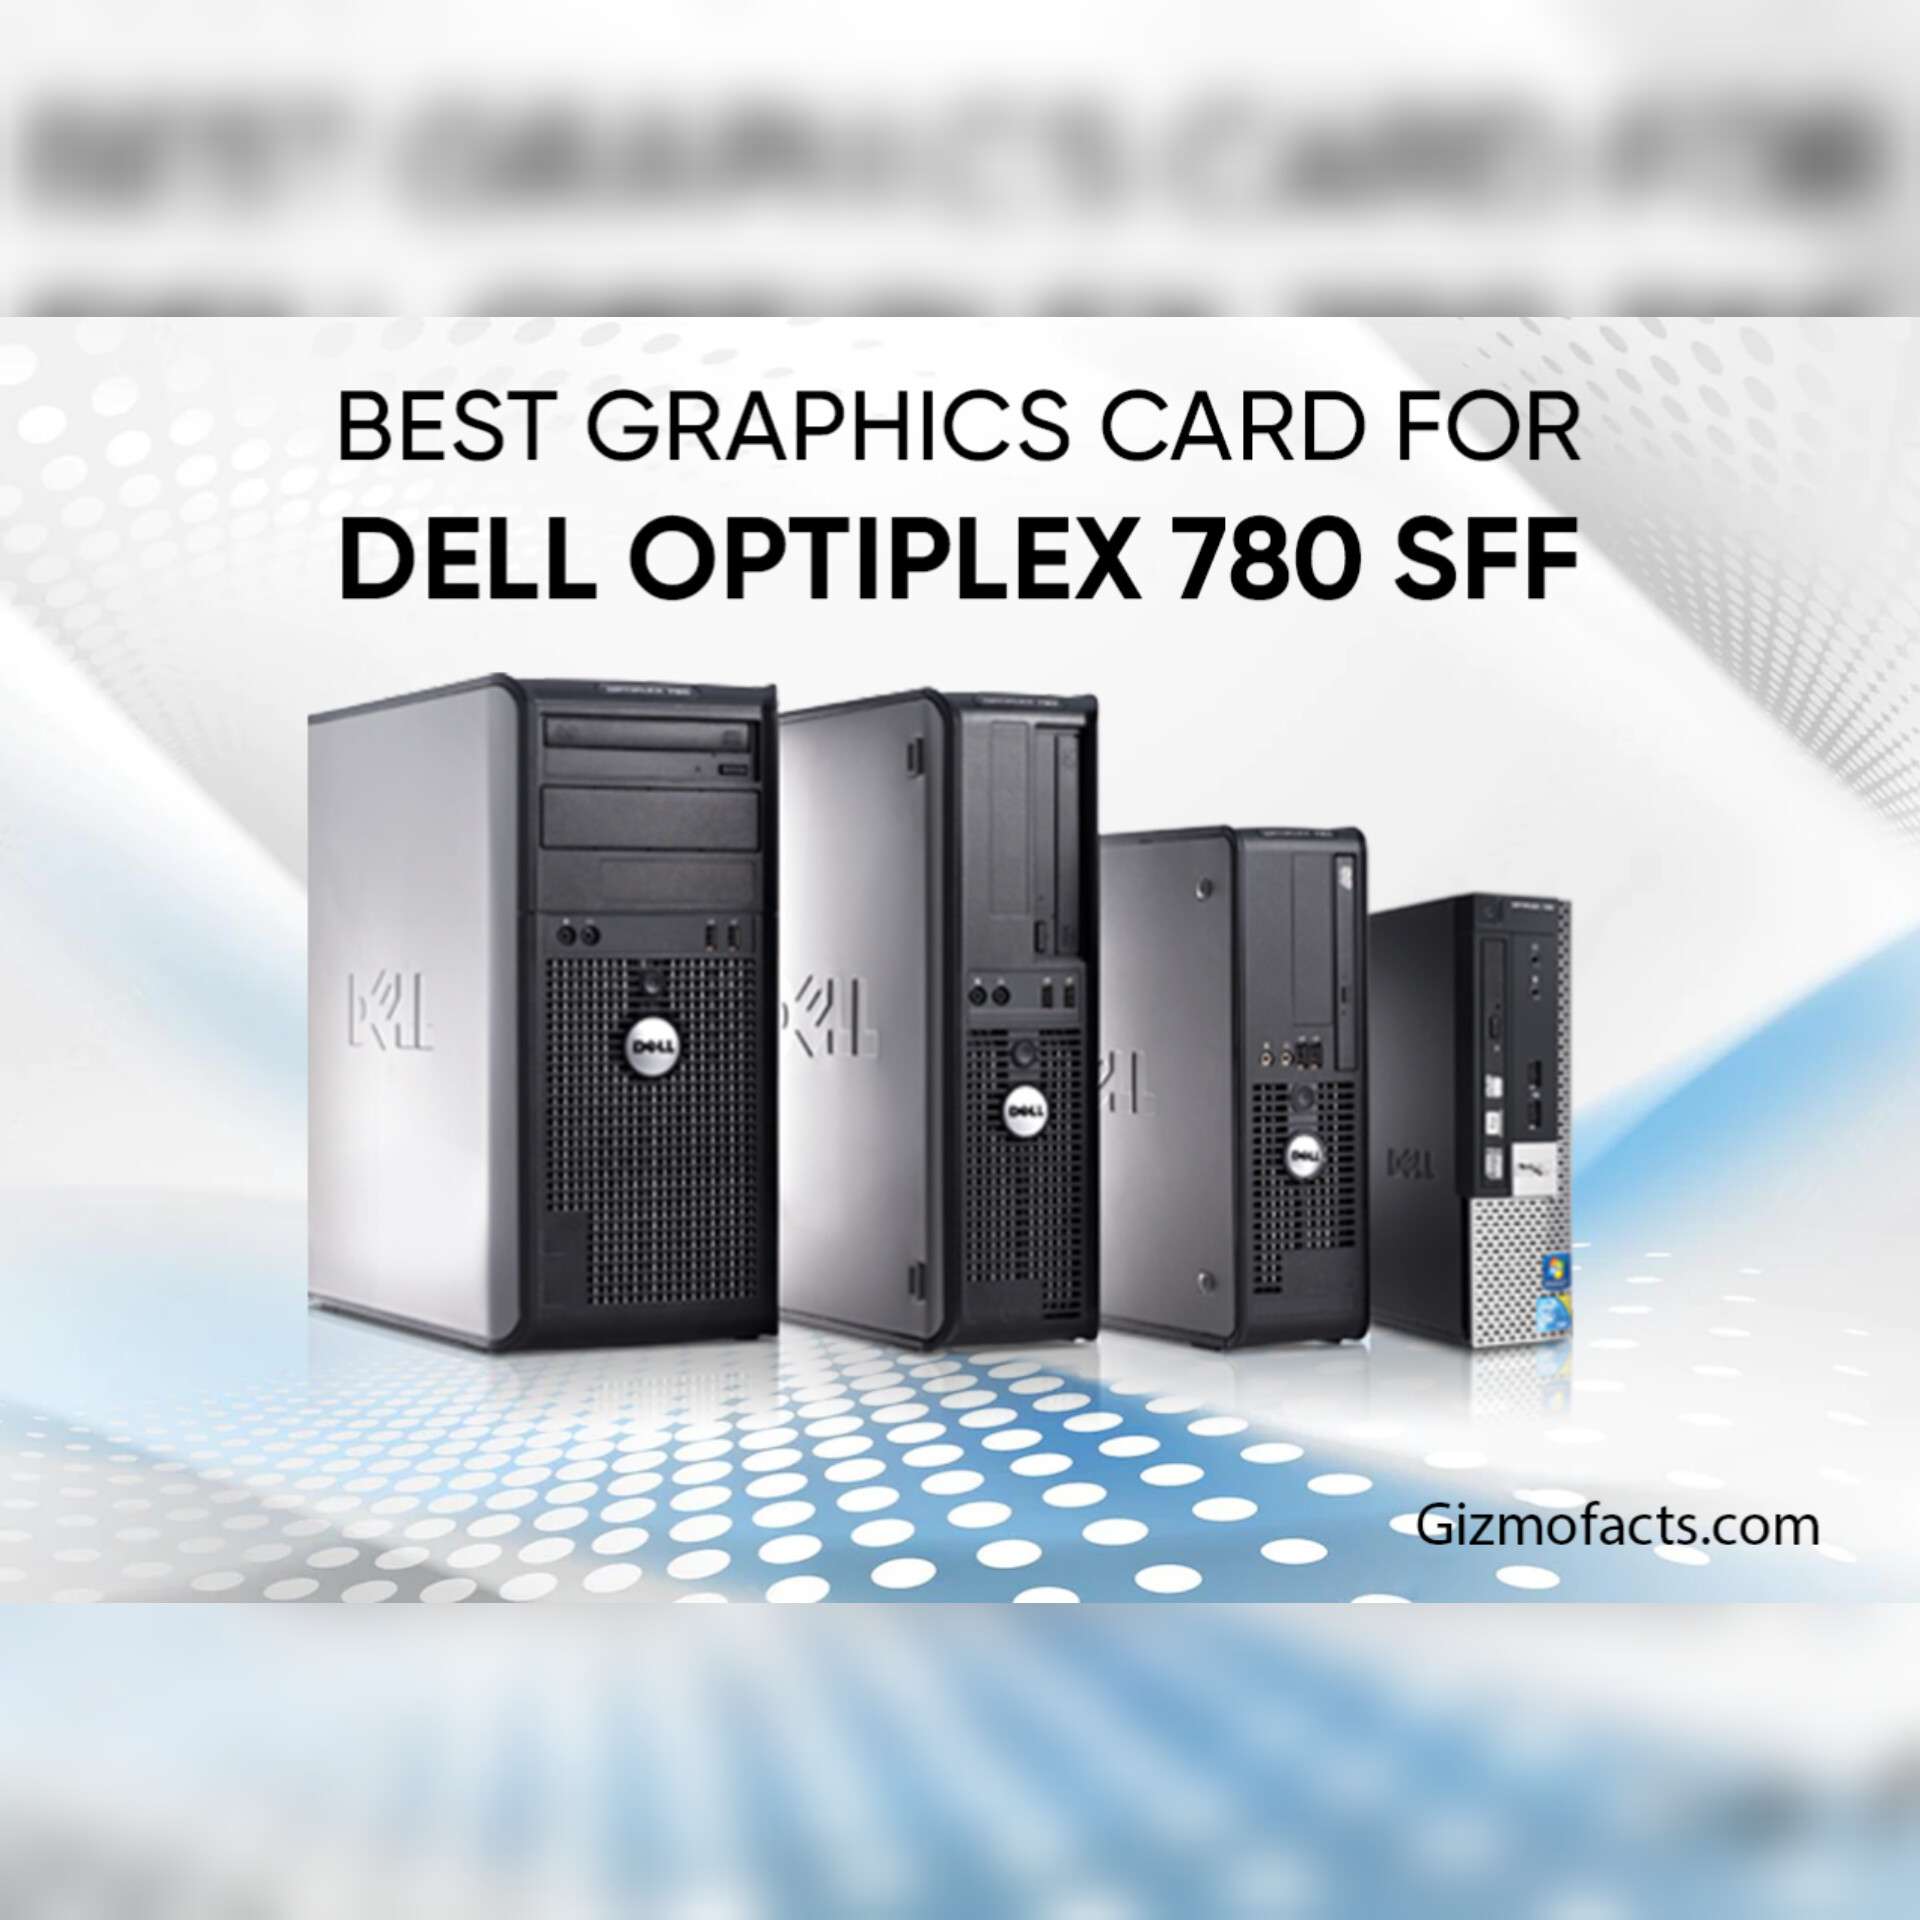 Best Graphics Card For Dell Optiplex 780 SFF - Gizmofacts